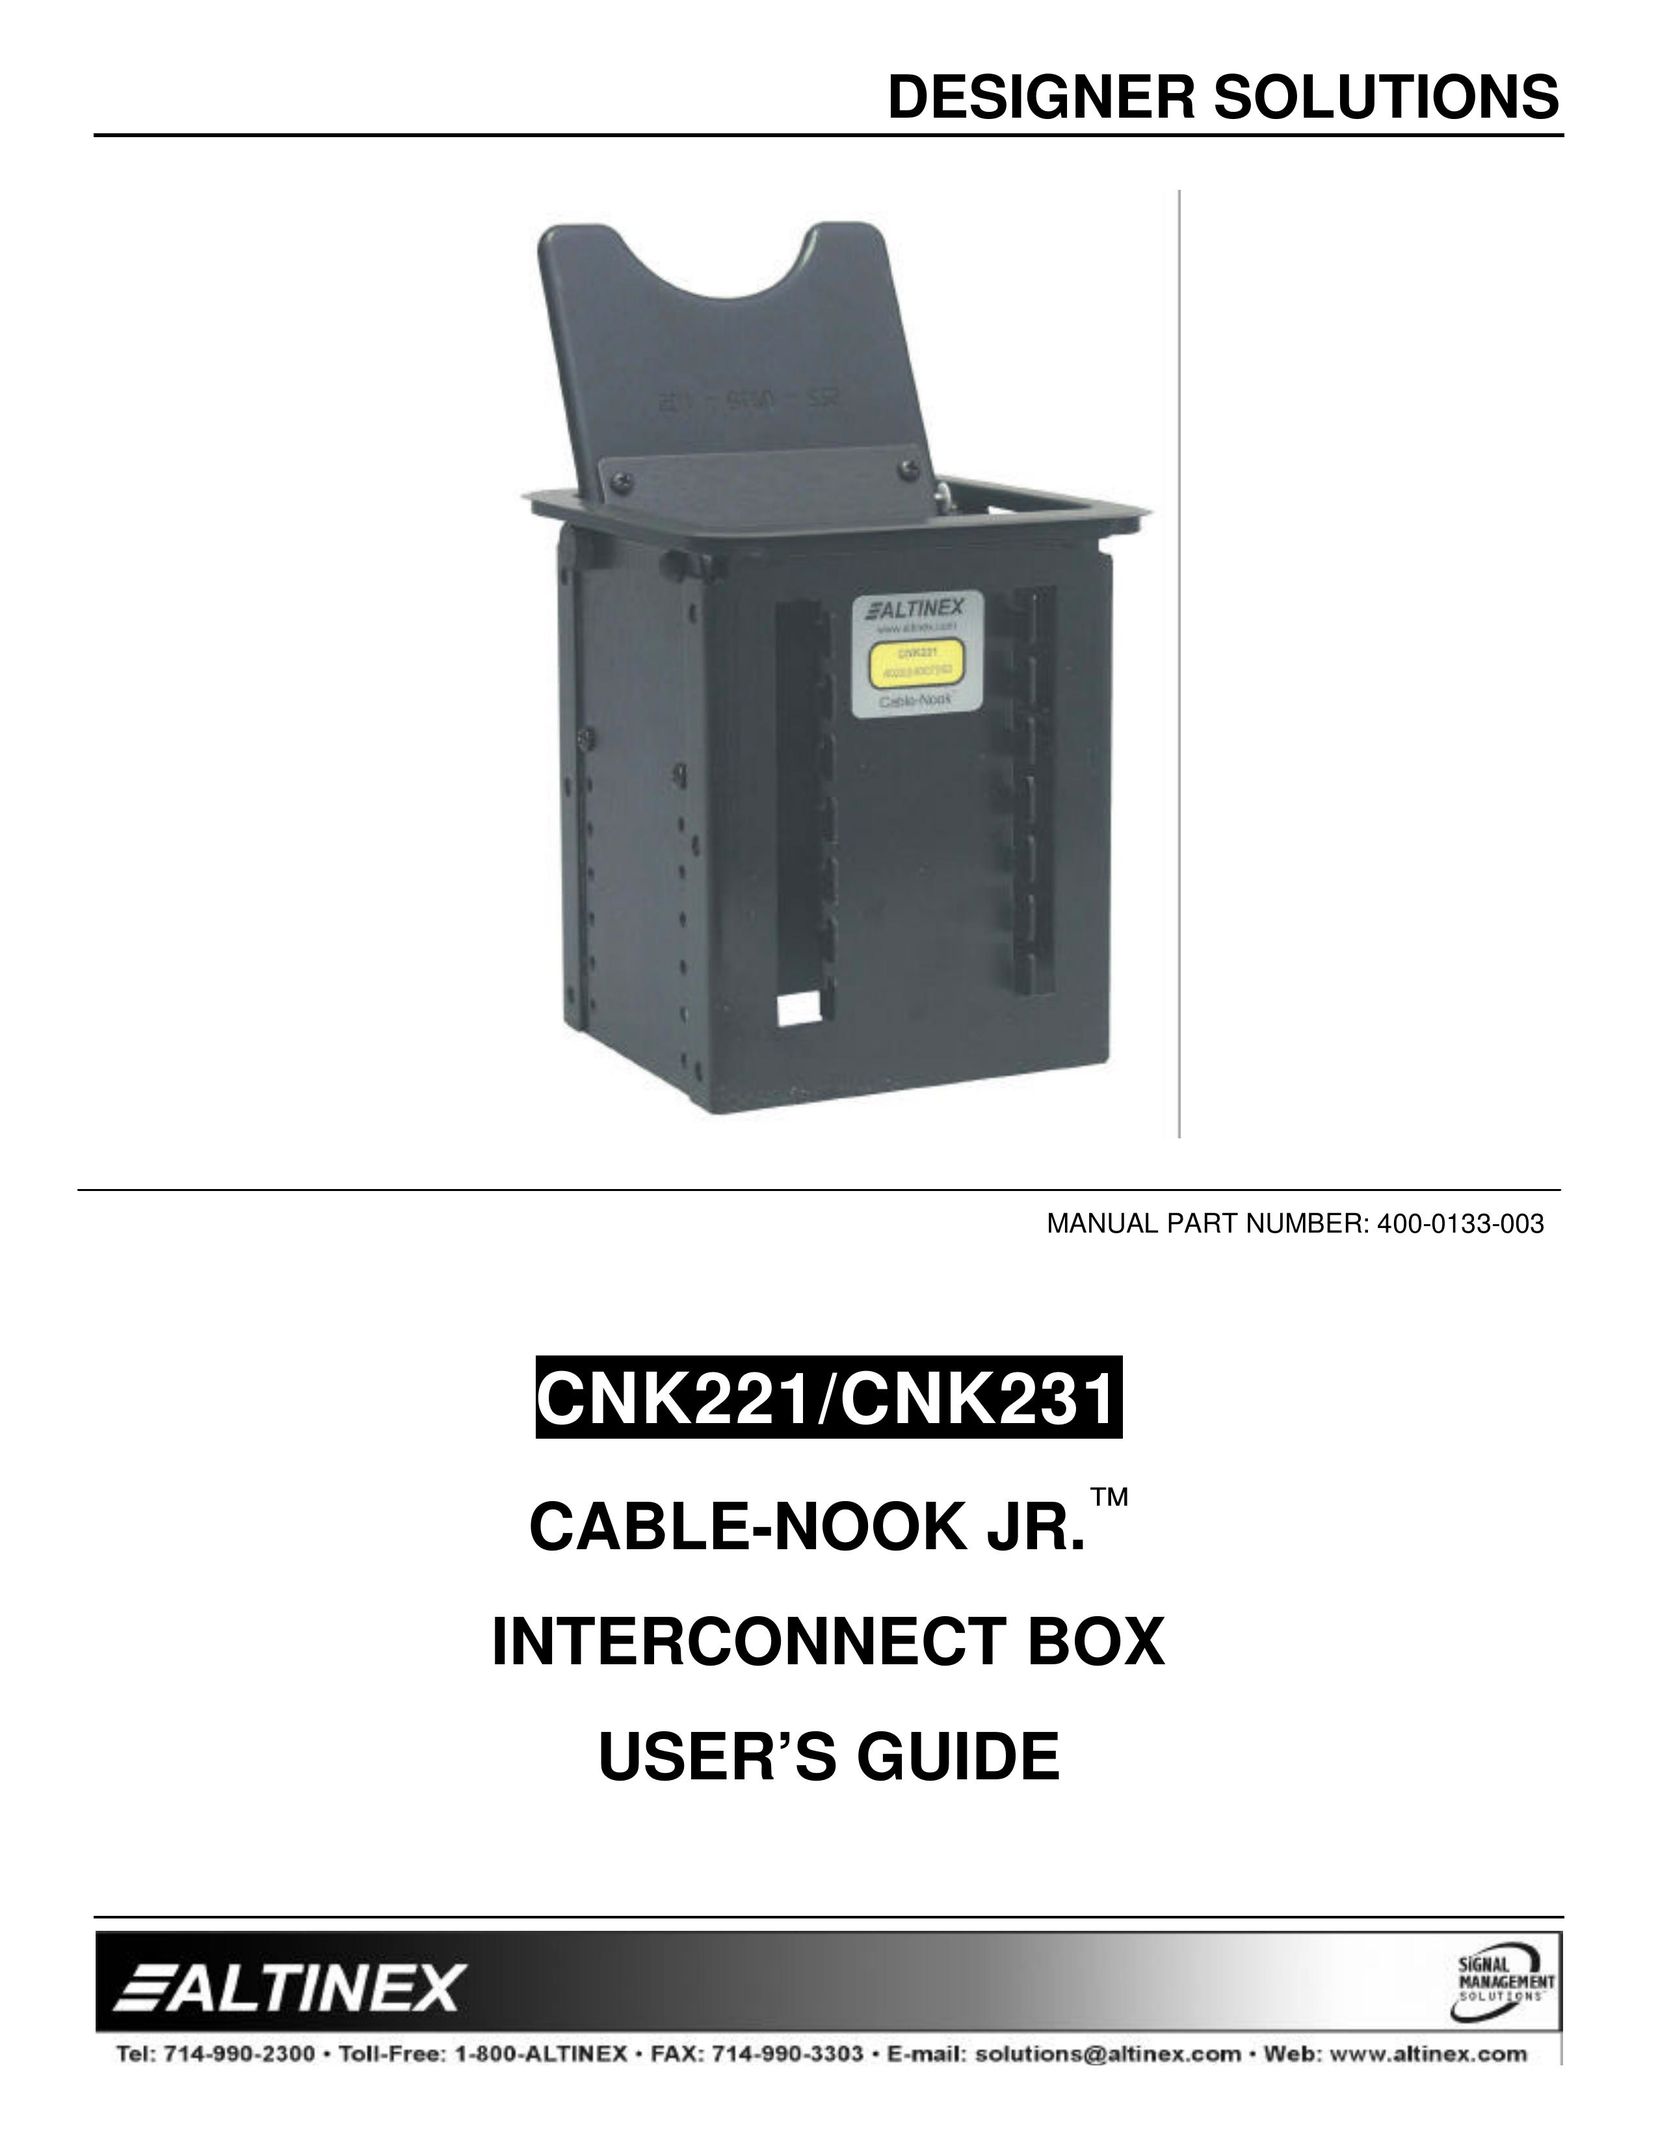 Altinex CNK221 Network Card User Manual (Page 1)